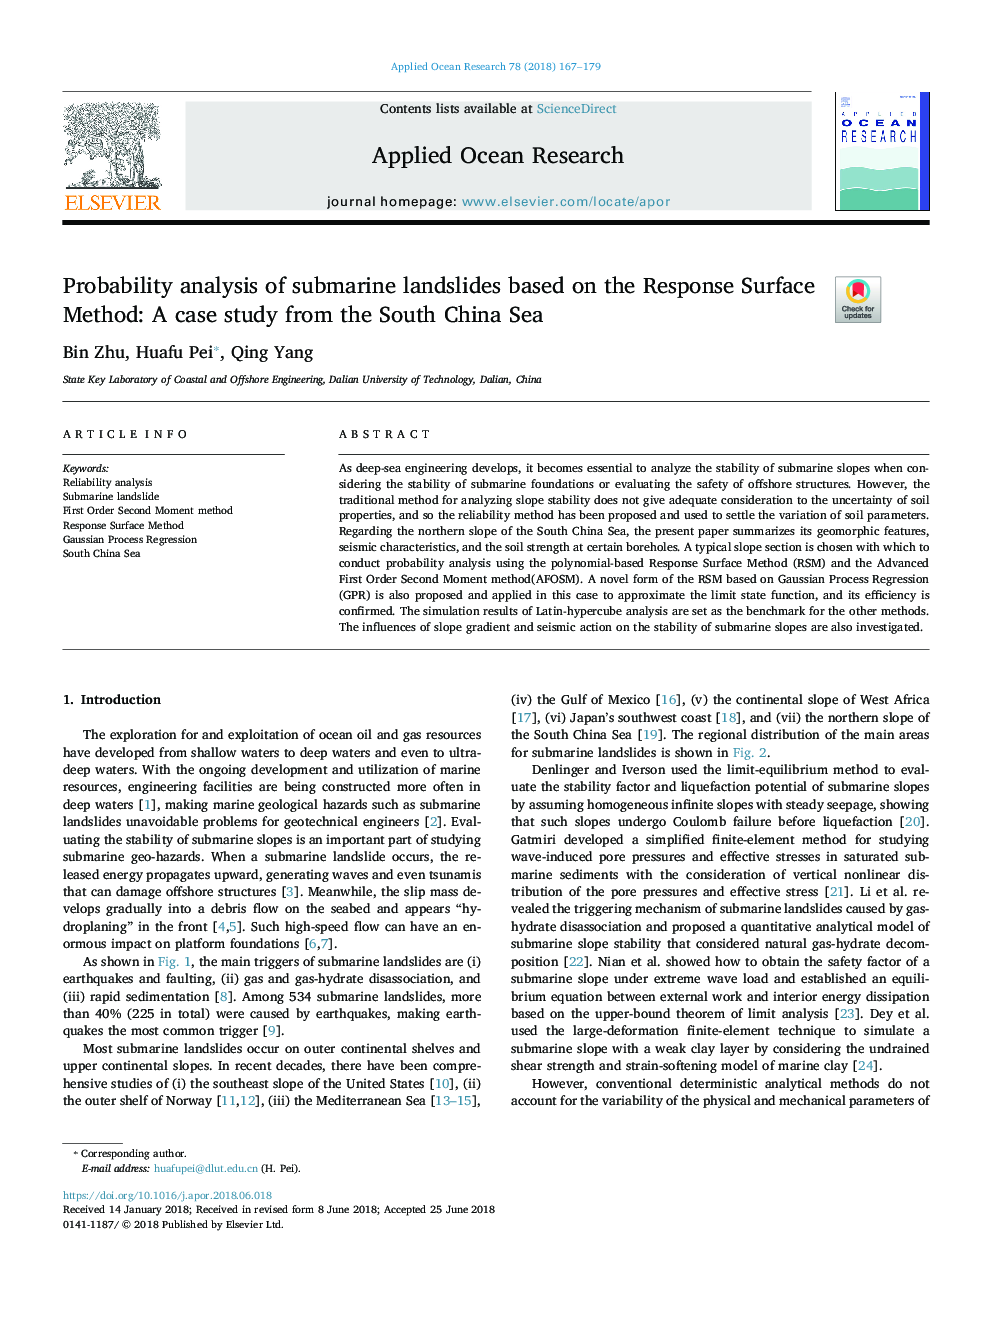 Probability analysis of submarine landslides based on the Response Surface Method: A case study from the South China Sea